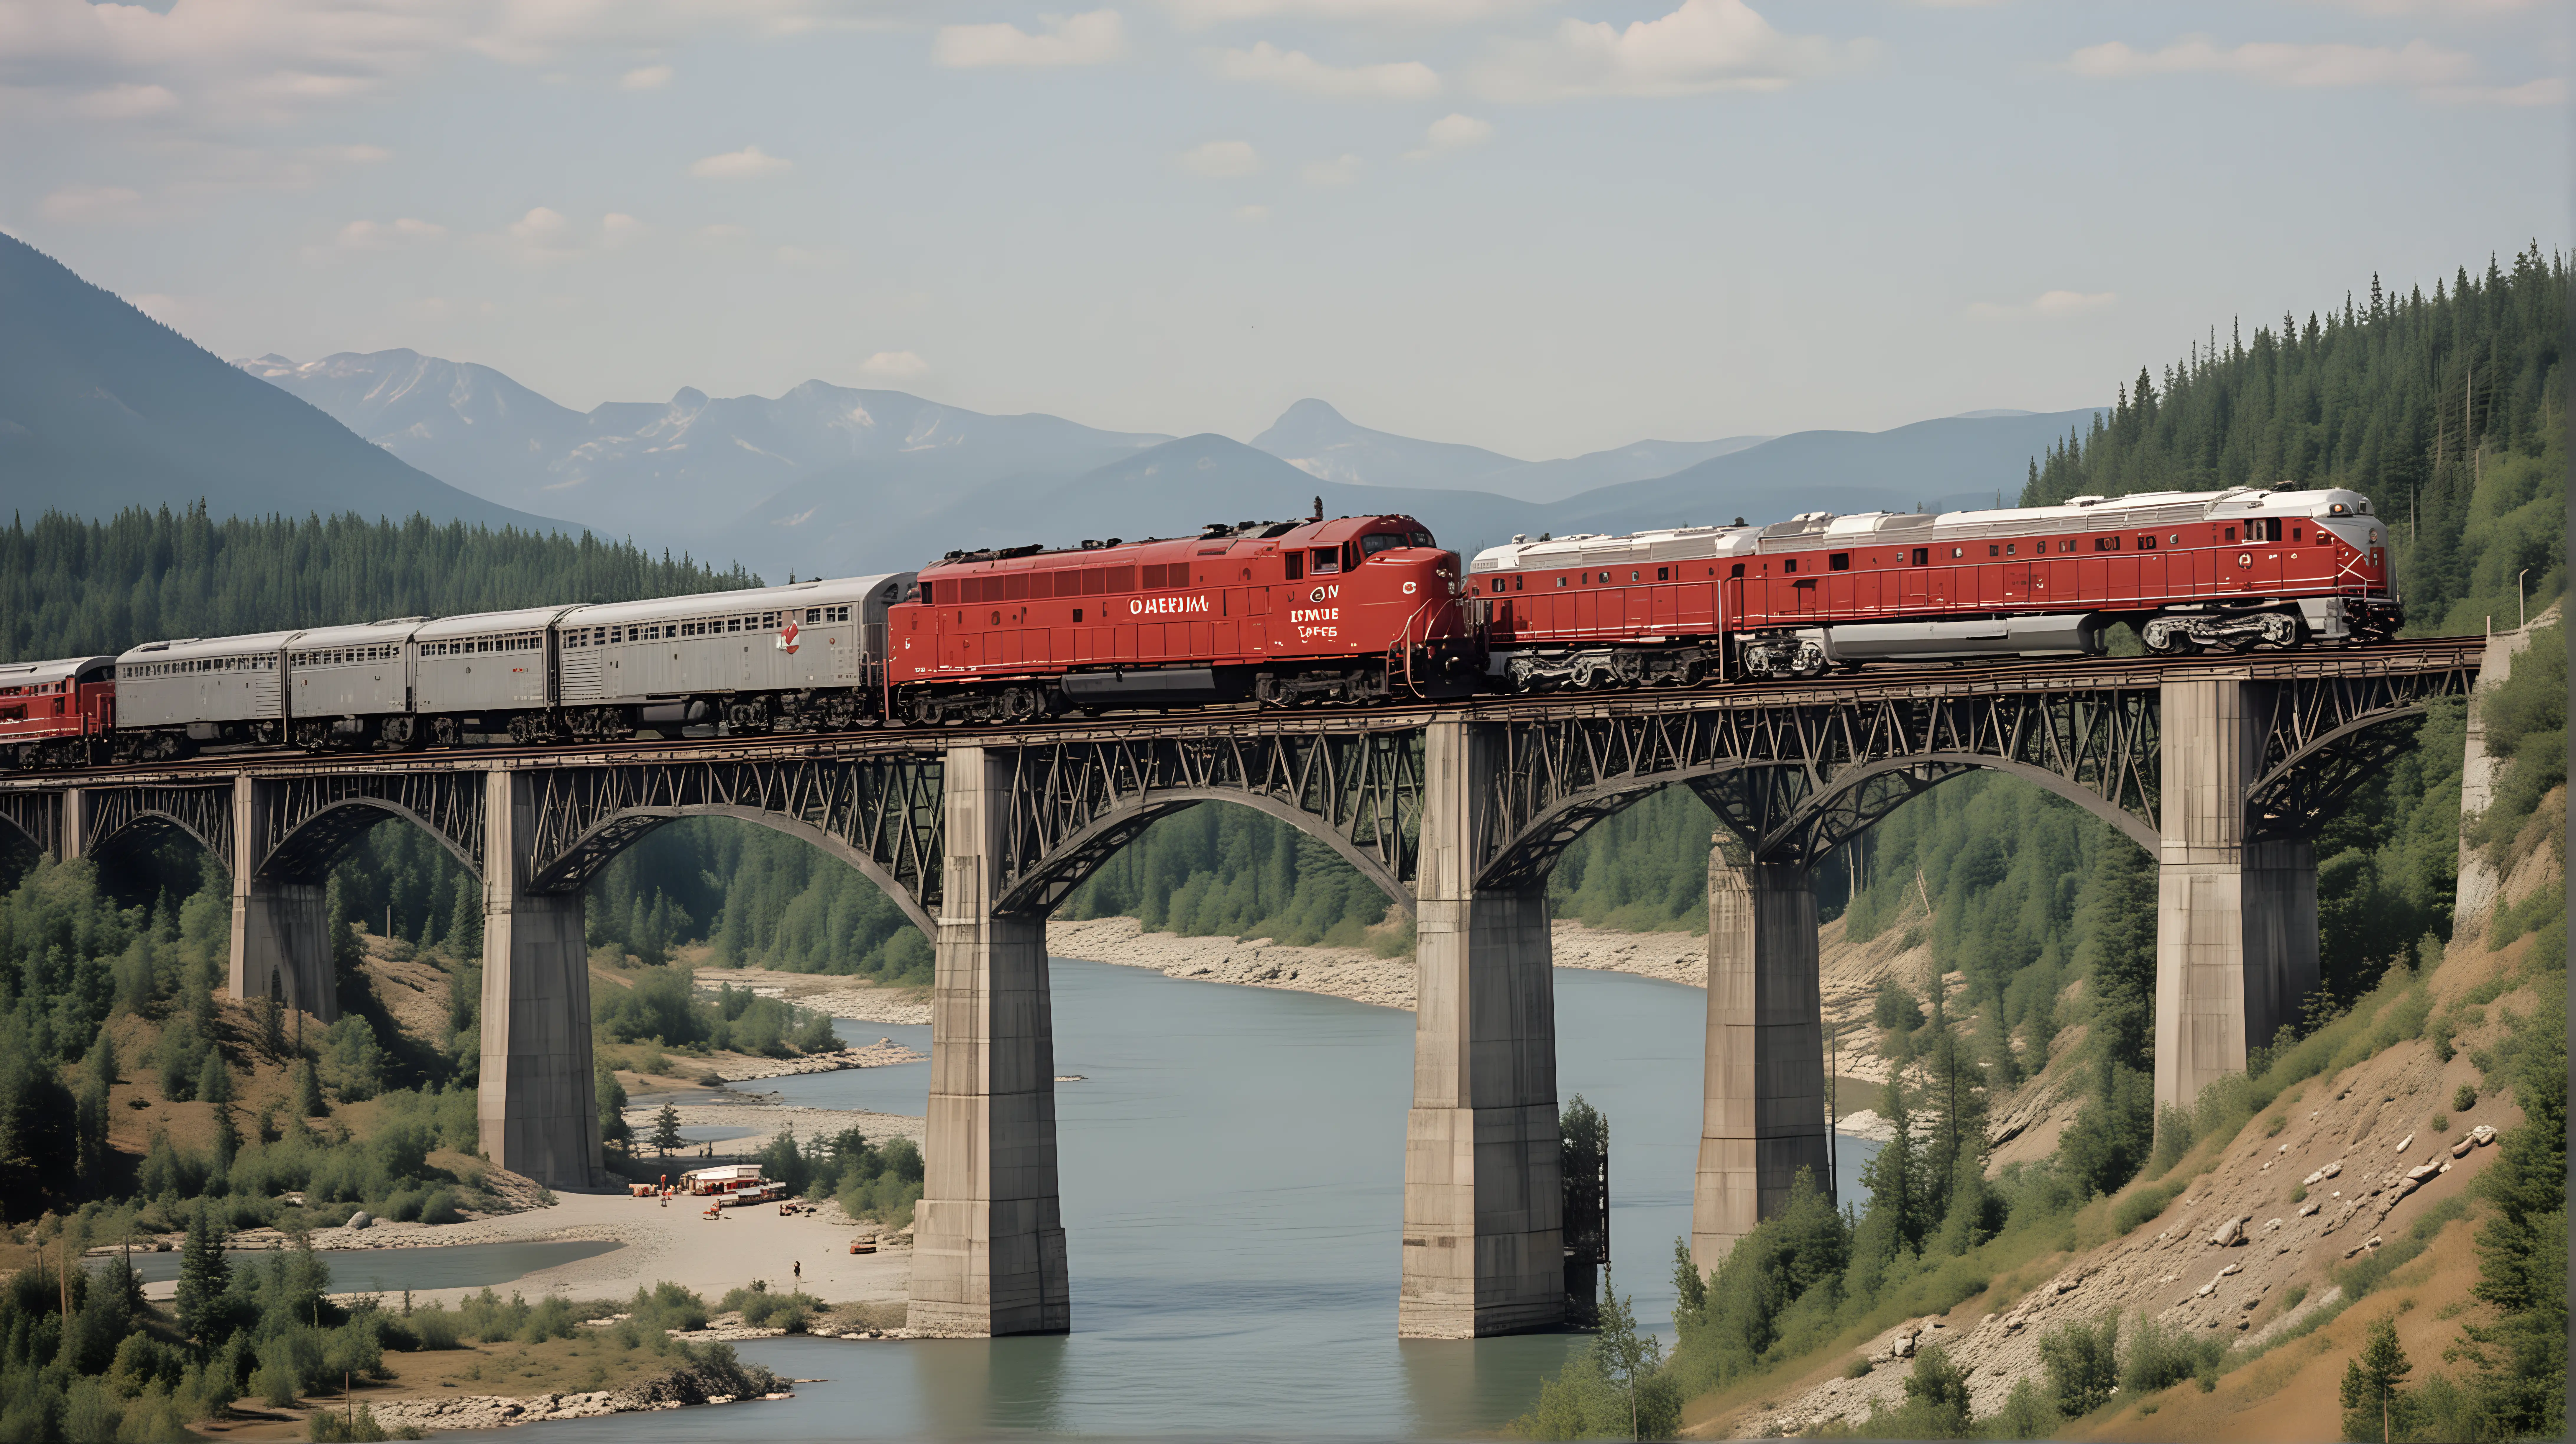 Canadian Pacific Passenger Train Crossing Bridge with Aluminum Cars 1950s Style